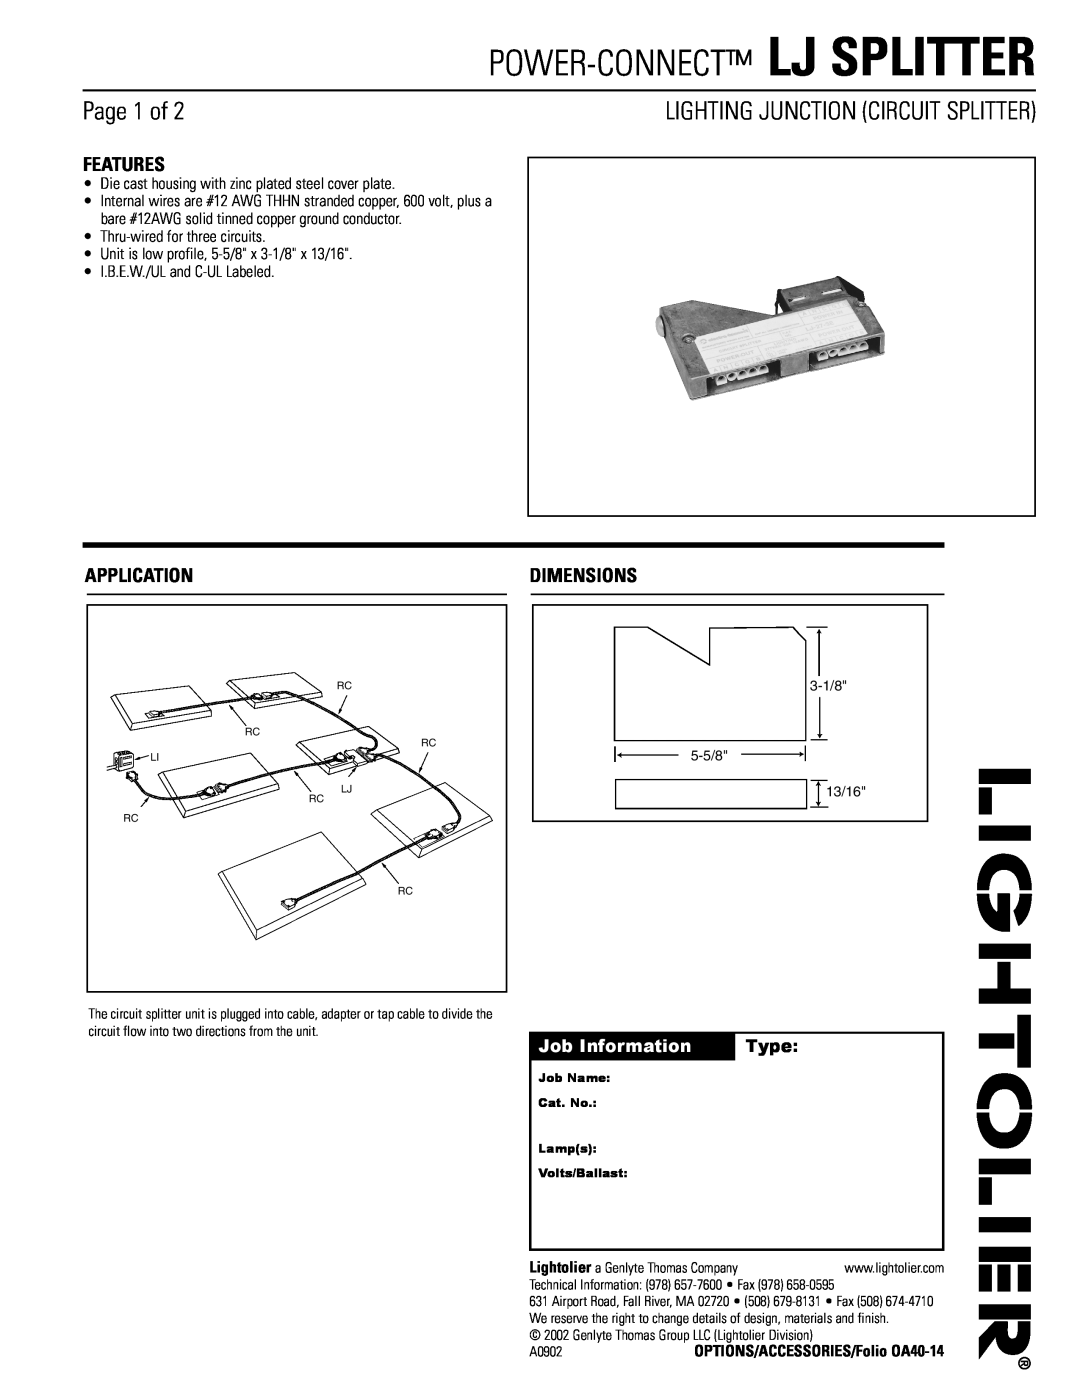 Lightolier LJ SPLITTER dimensions Page 1 of, Features, Dimensions, Job Information, Type, Thru-wiredfor three circuits 